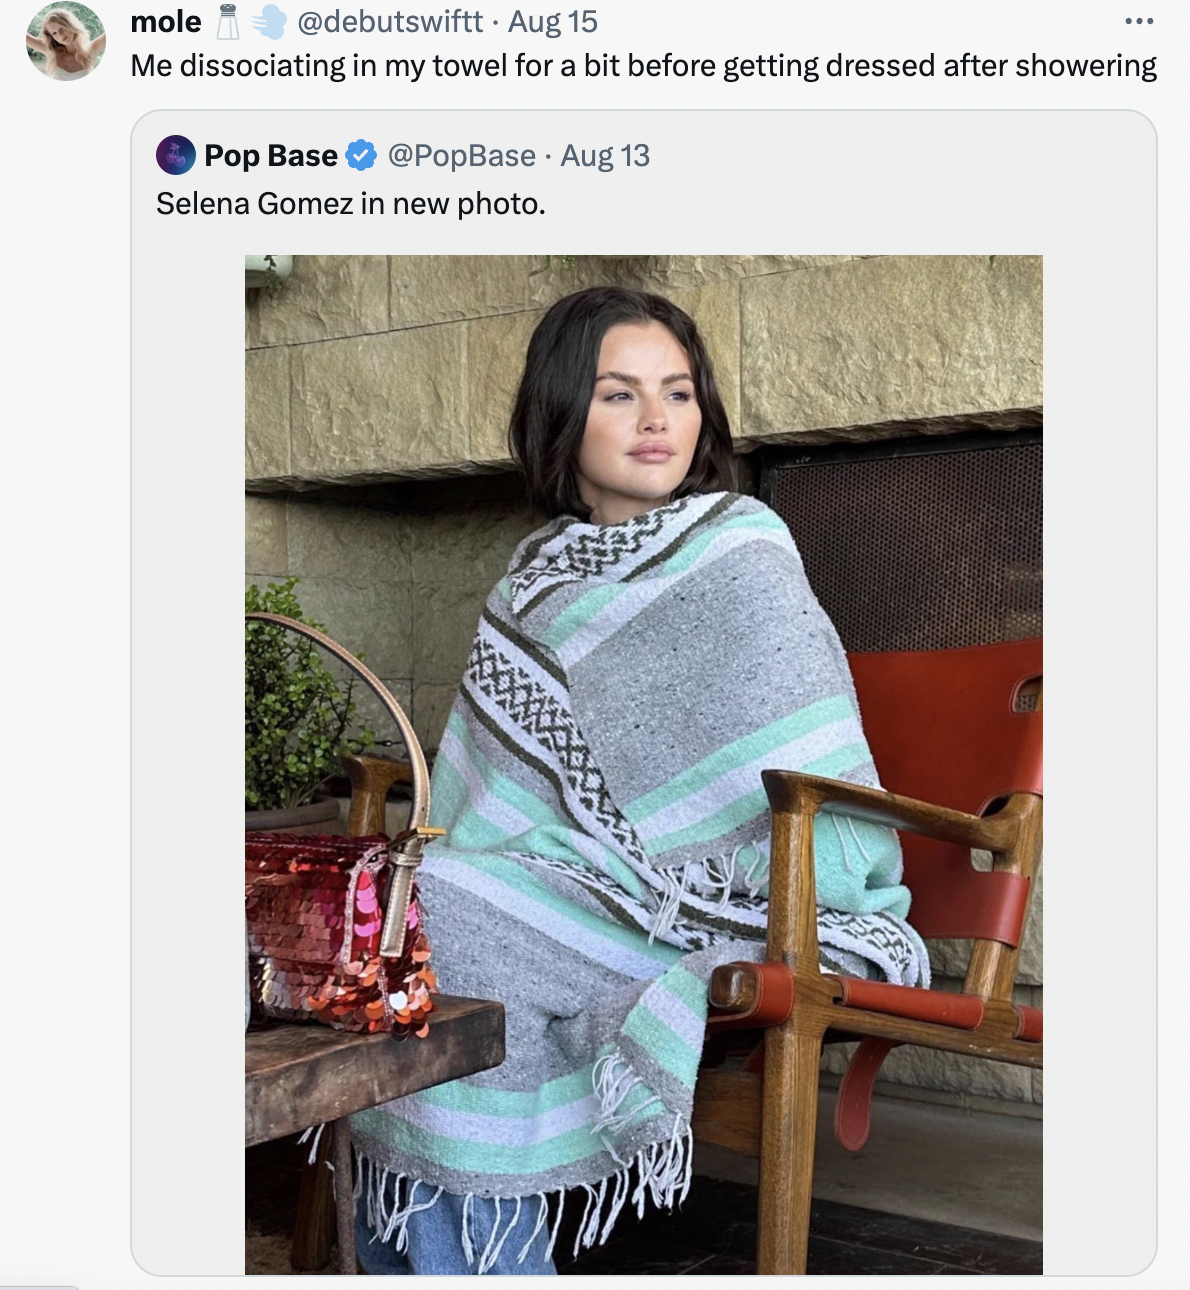 selena gomez in a blanket - stole - mole . Aug 15 Me dissociating in my towel for a bit before getting dressed after showering Pop Base Aug 13 Selena Gomez in new photo.